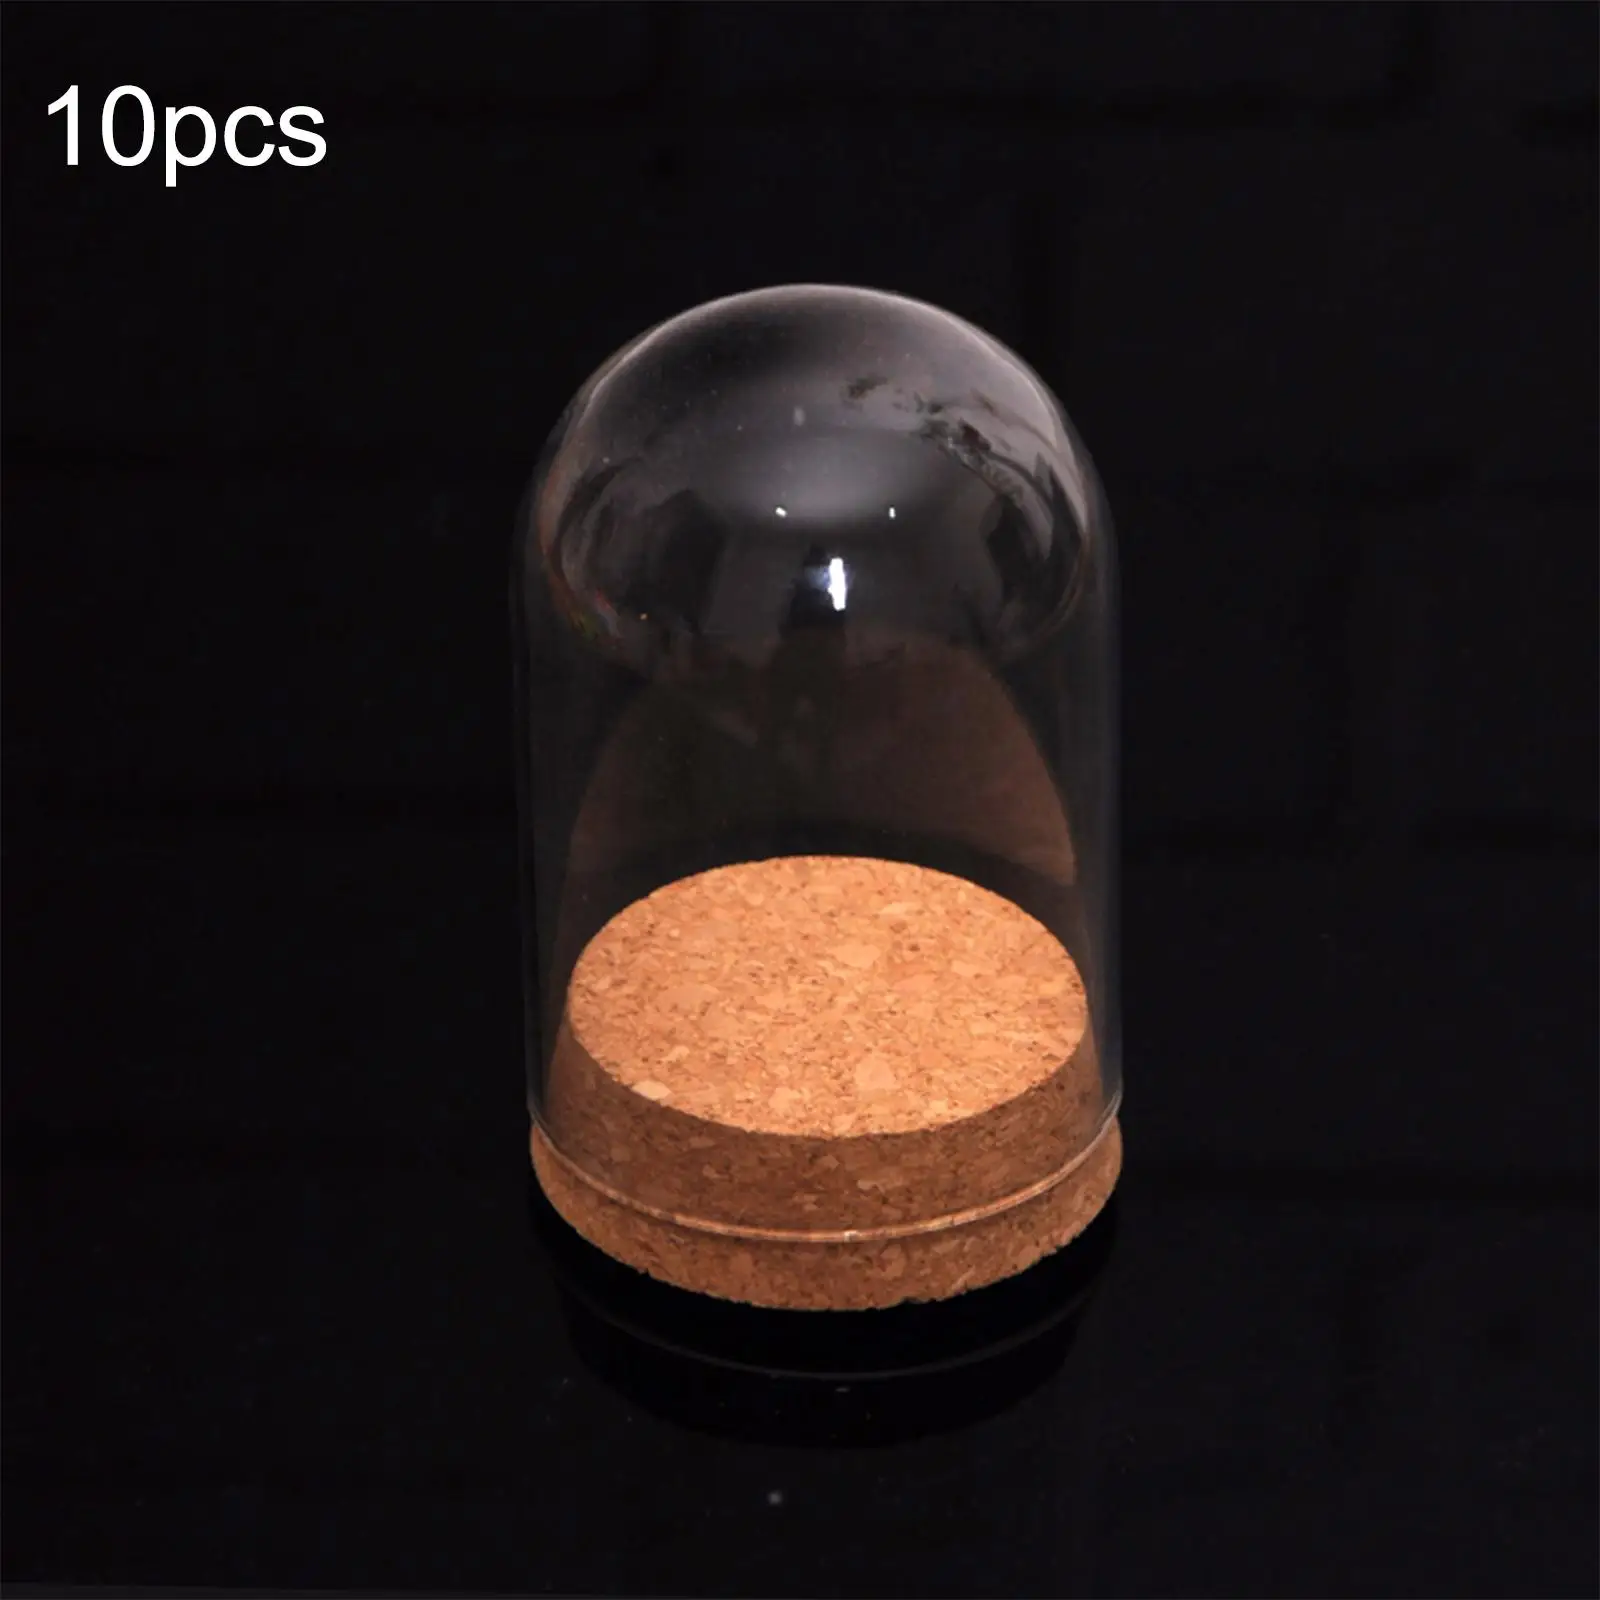 10Pcs Display Dome with Base Decor Dustproof Crafts Glass Cloche Showcase